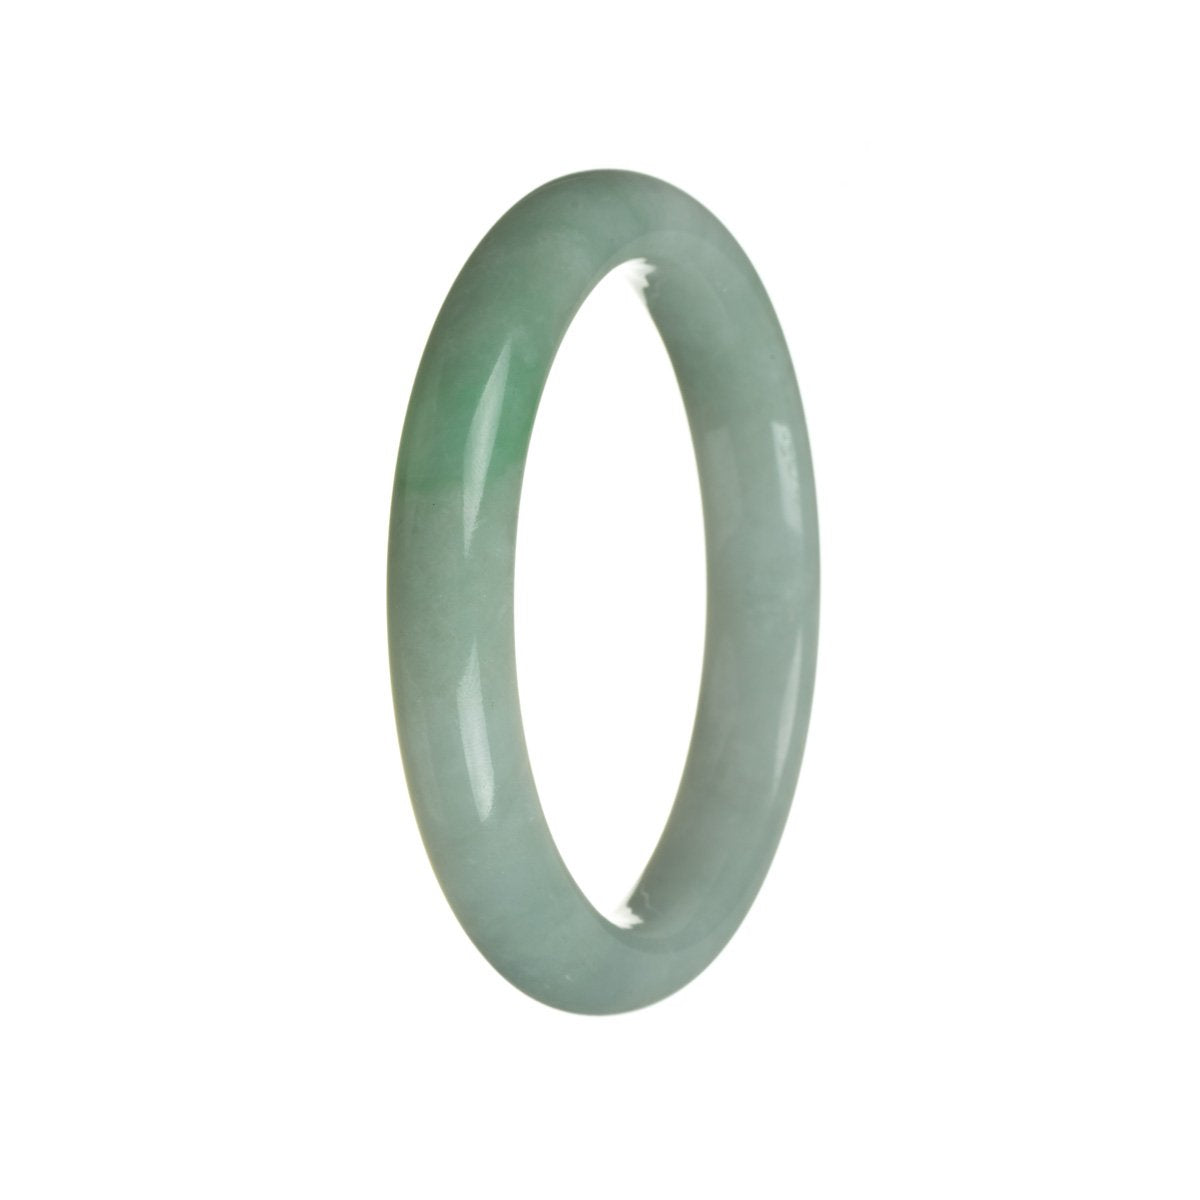 A half-moon shaped genuine grade A green jadeite bangle, measuring 62mm in size. Expertly crafted by MAYS GEMS.